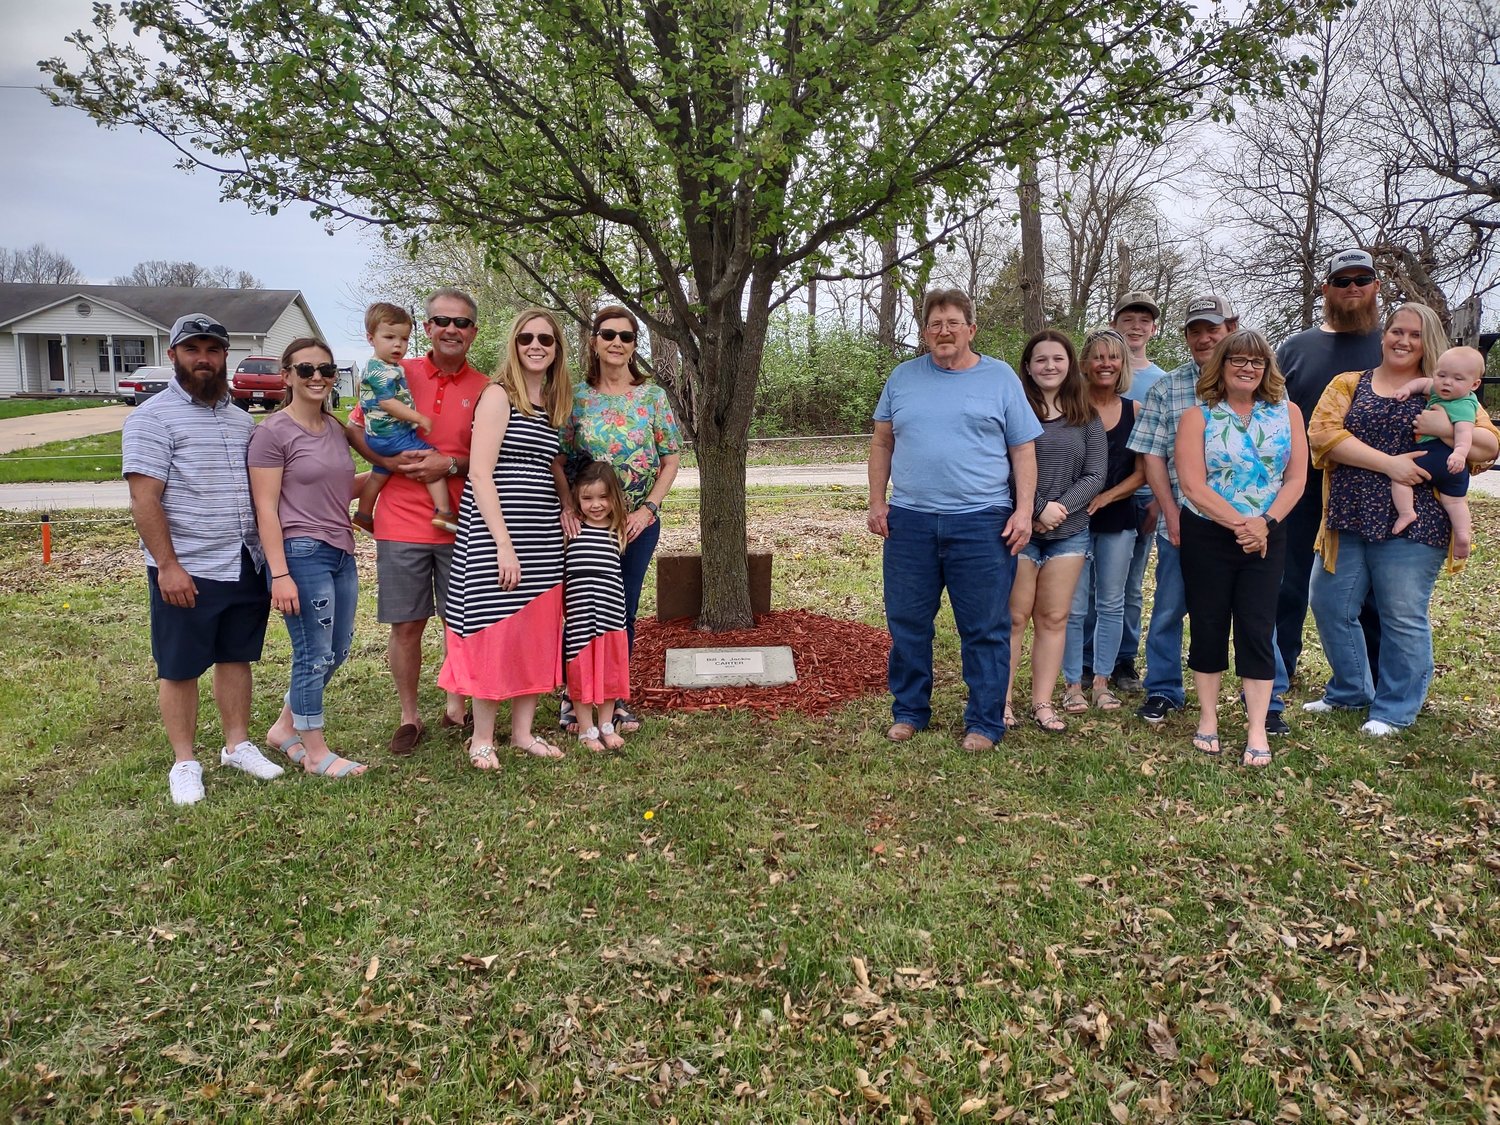 Family members of Jackie Carter pose next to a tree during a memorial tree planting ceremony at the Old Settlers Picnic Grounds on April 23. Carter, who died in 2019, was honored at the ceremony.